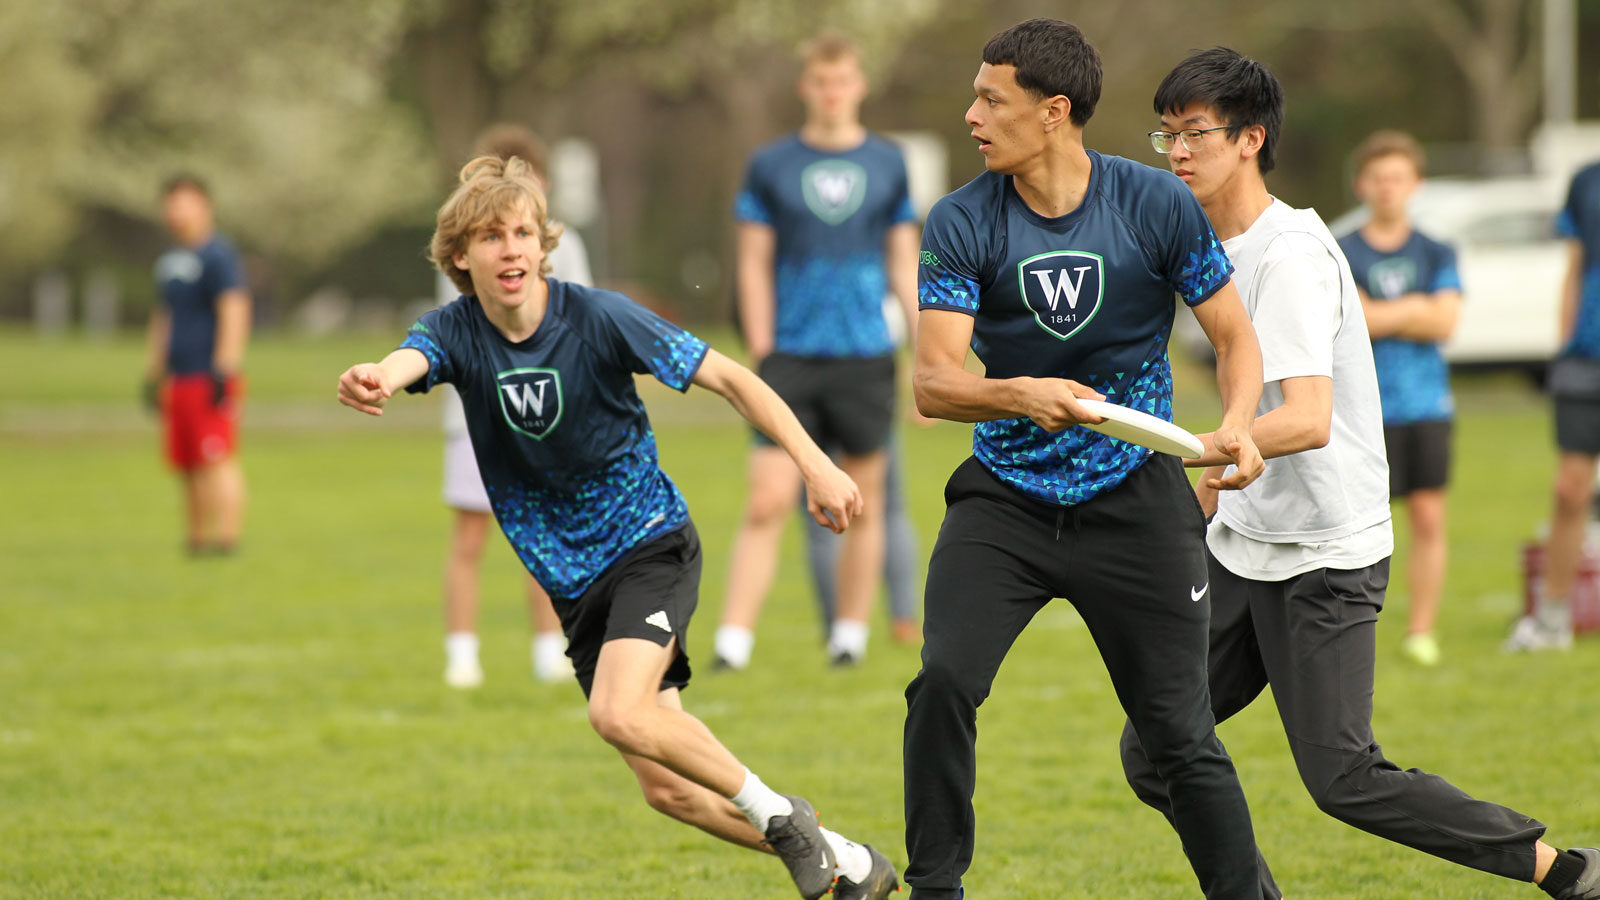 boys playing ultimate frisbee